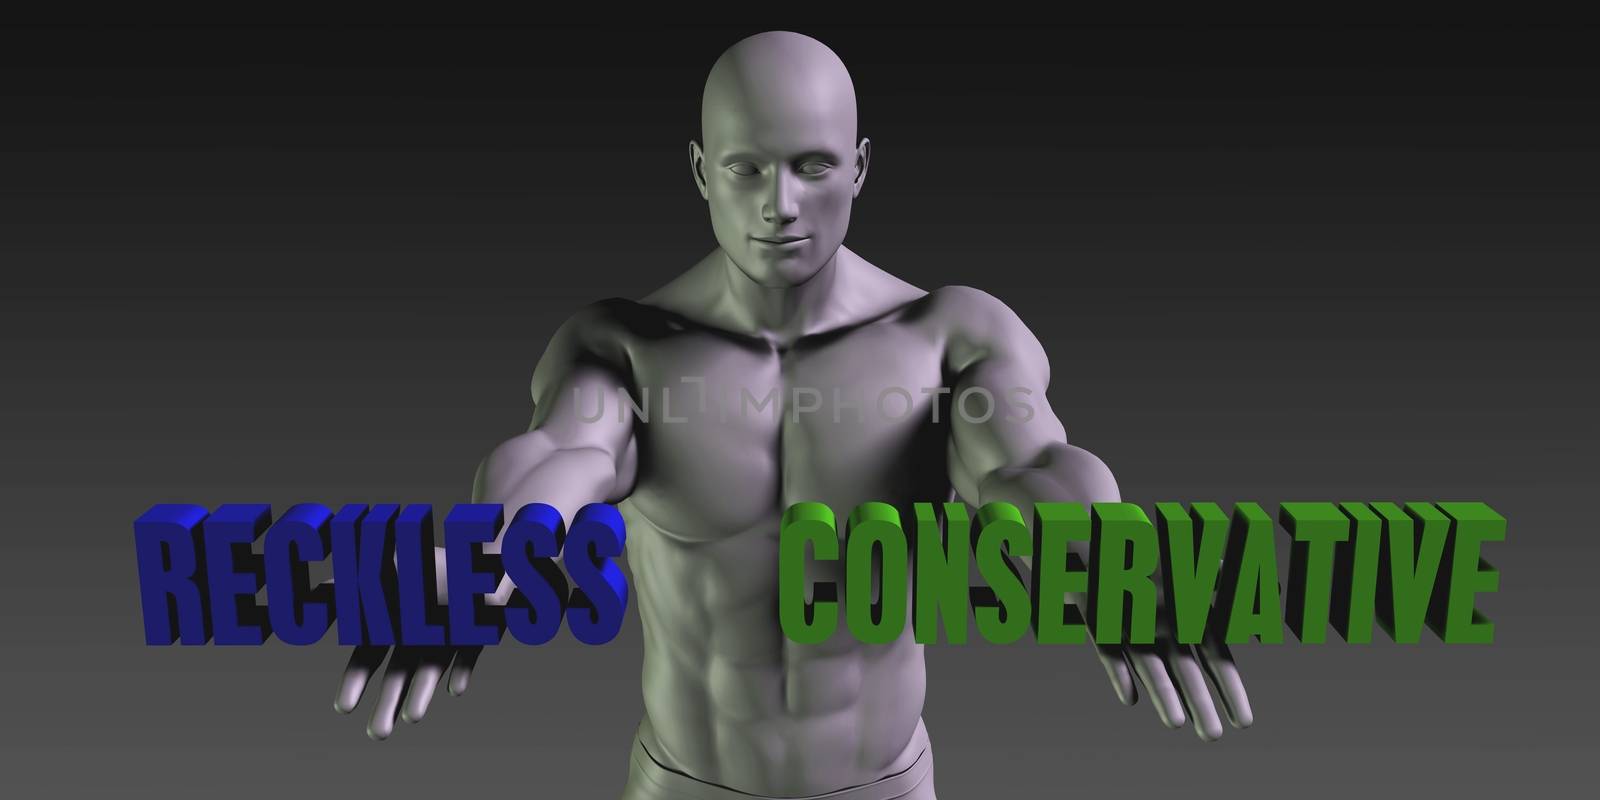 Reckless or Conservative as a Versus Choice of Different Belief